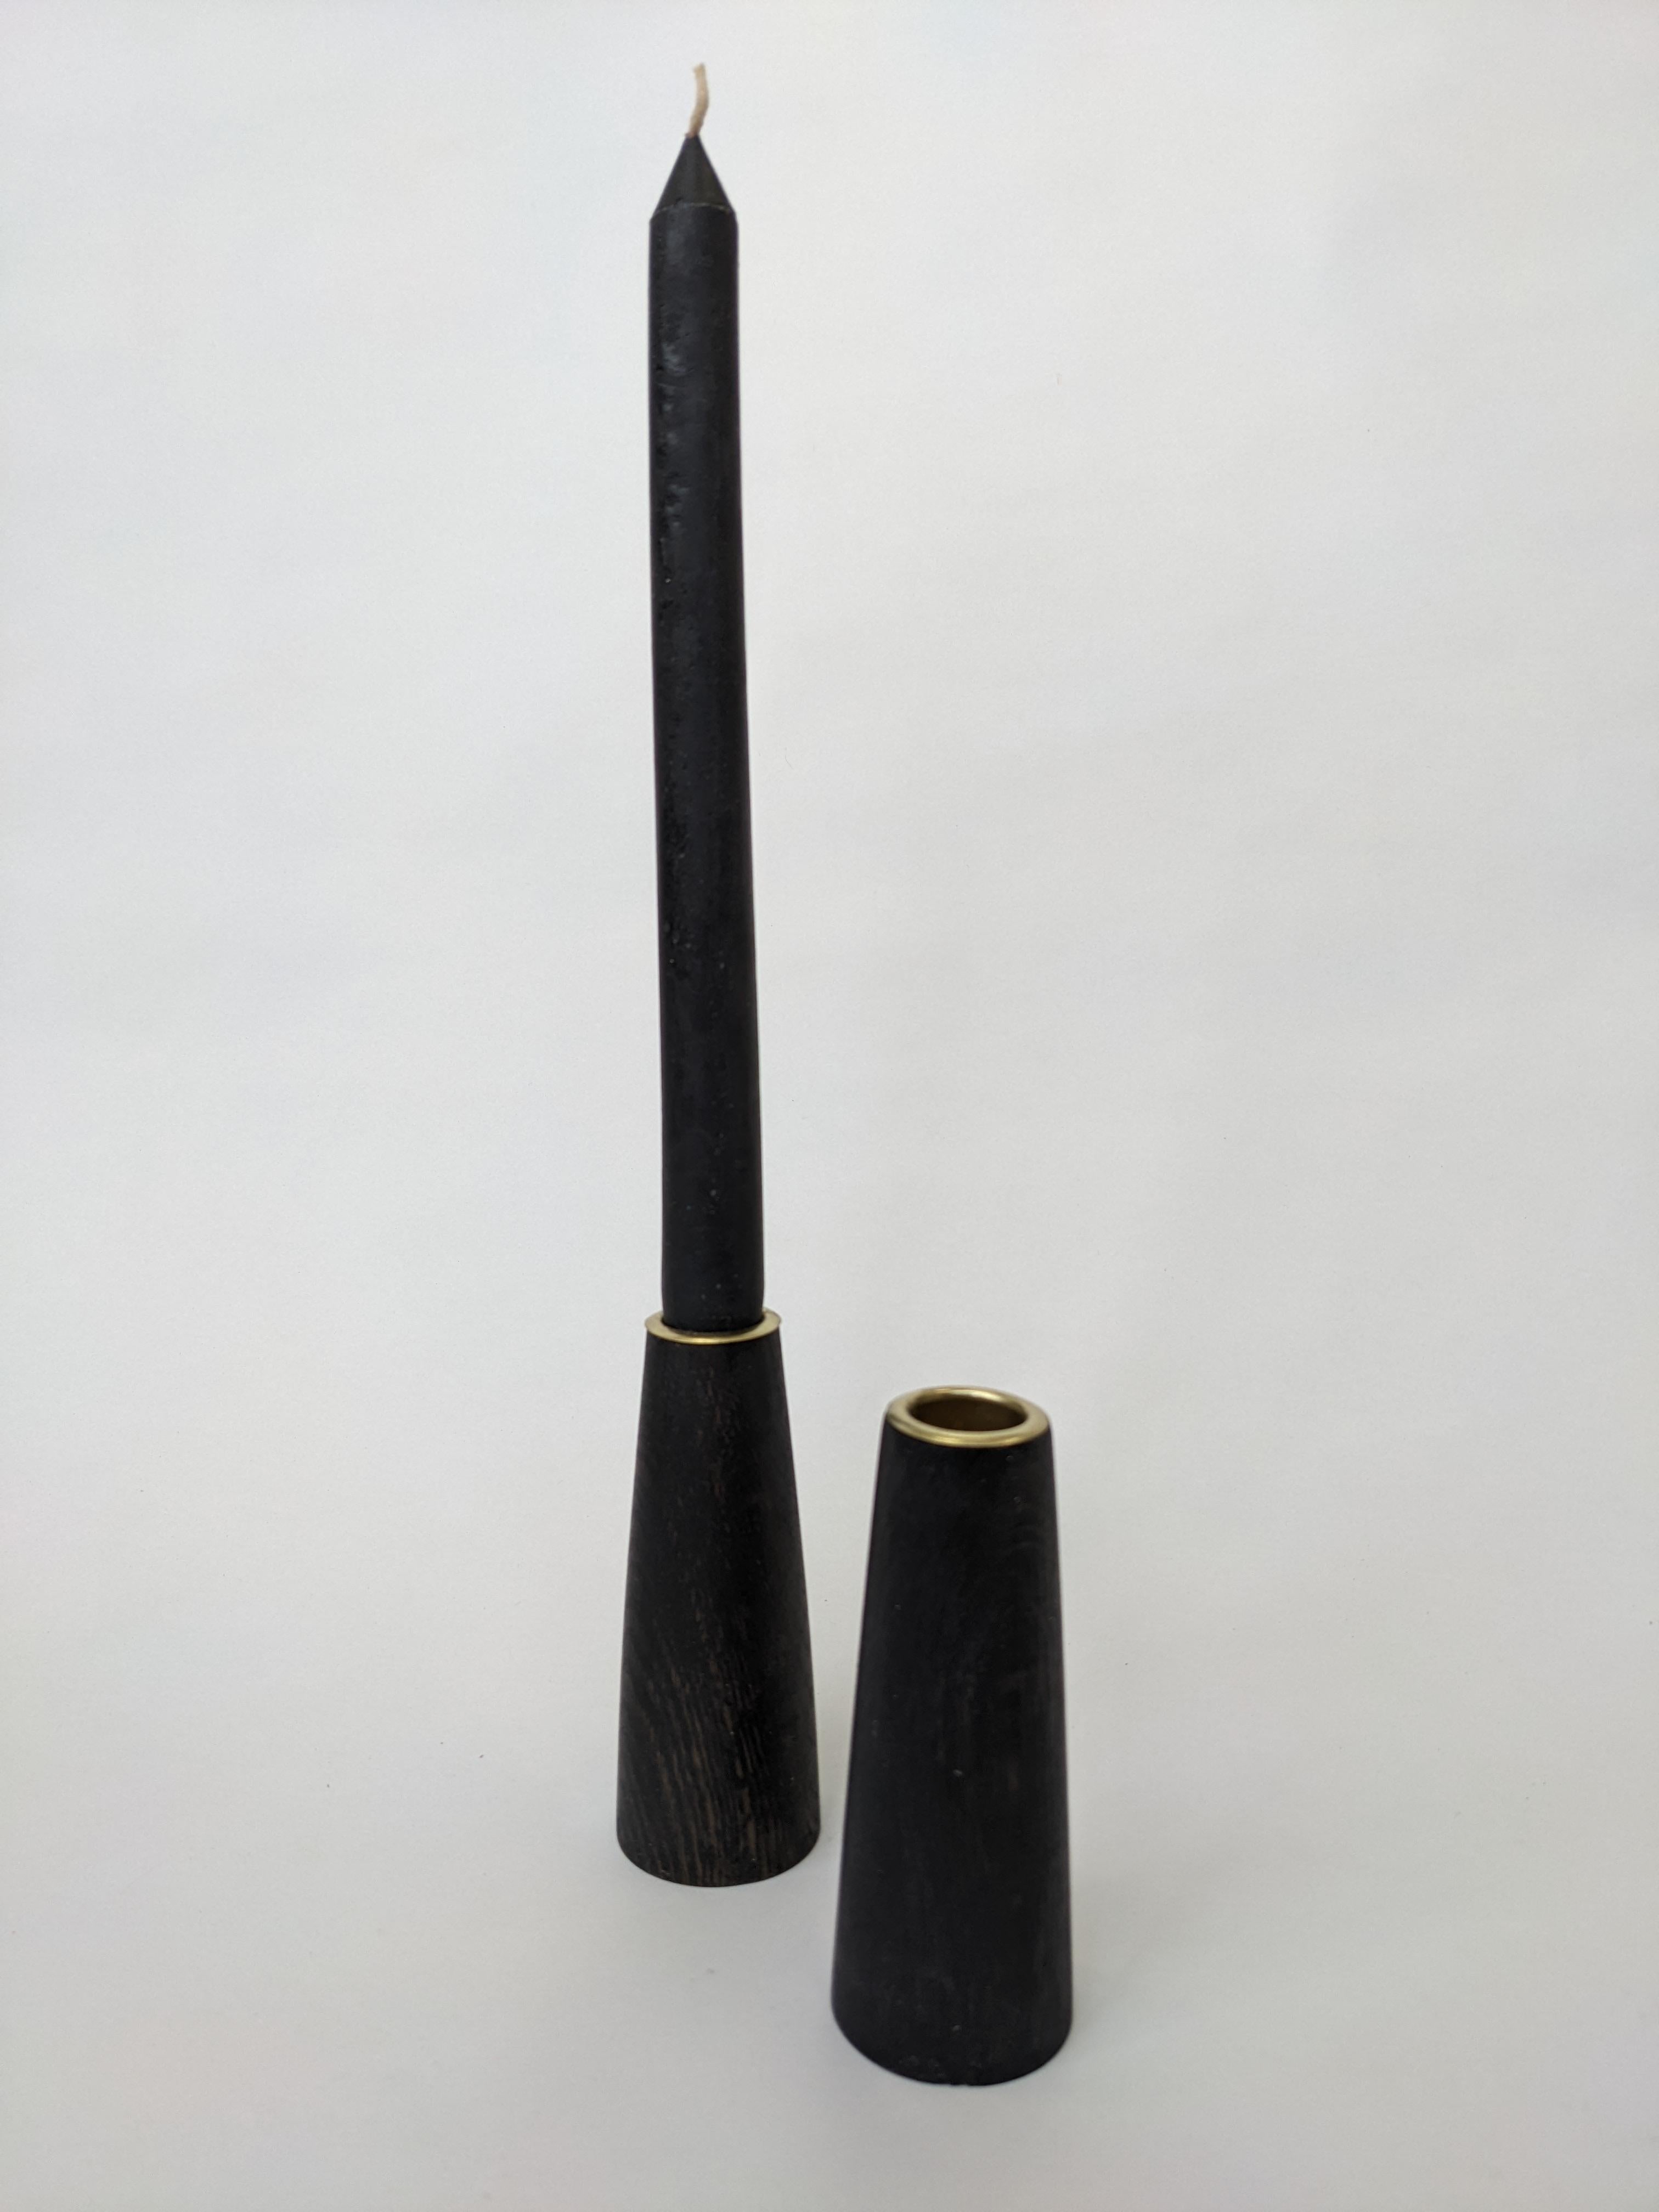 Ebonized Oak candle sticks with brass ferrules. 
Elegant, hand crafted, perfect for the holiday season, or any time.

This item is designed by Fuugs and made from salvaged trees, milled by us, dried and crafted into furniture by hand in